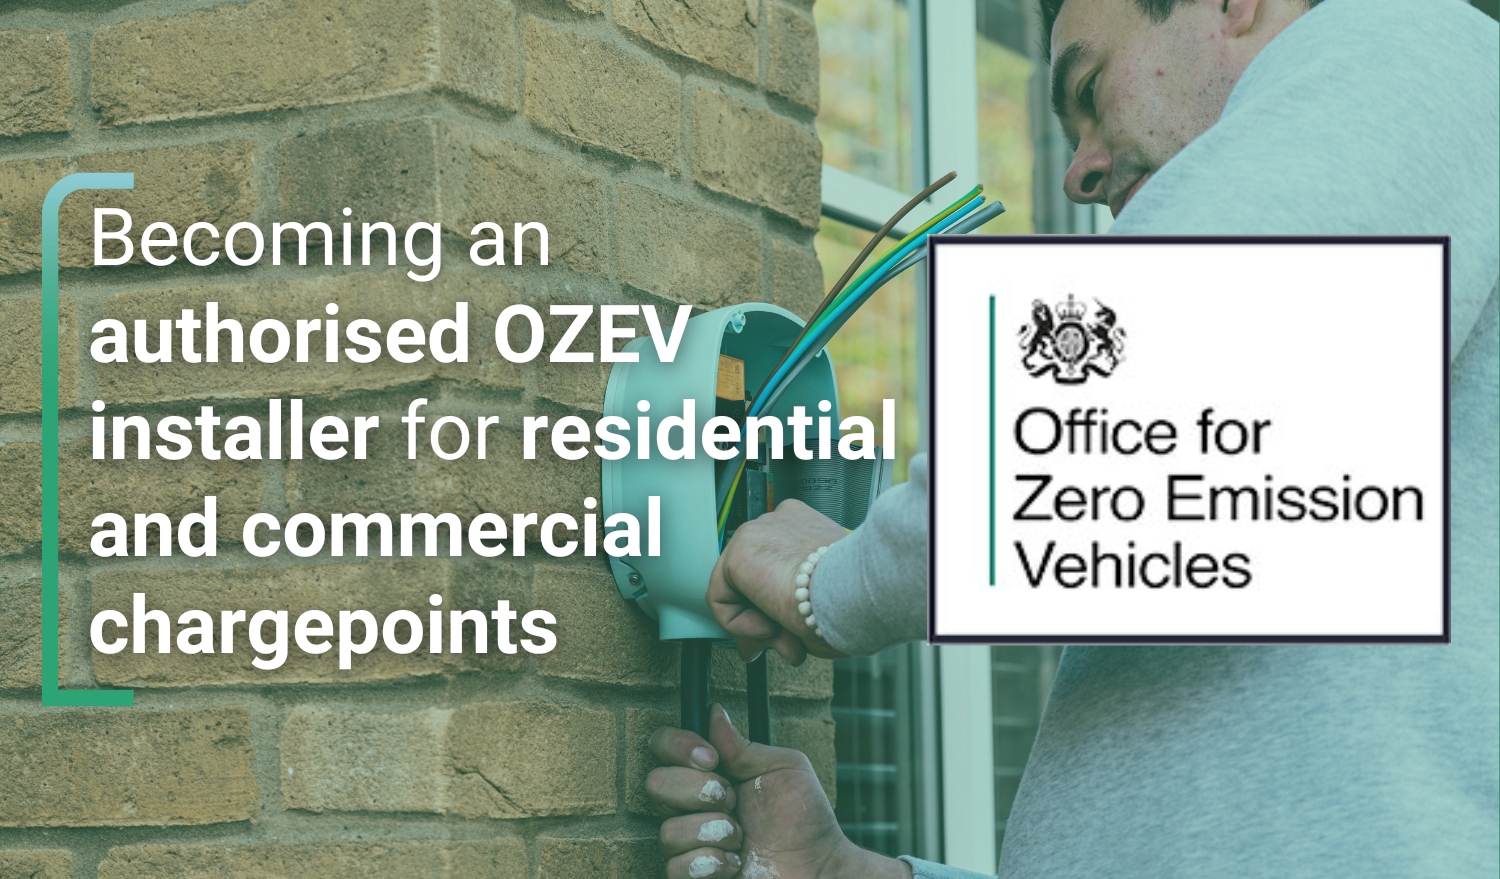 Becoming an authorised OZEV installer for residential and commercial chargepoints